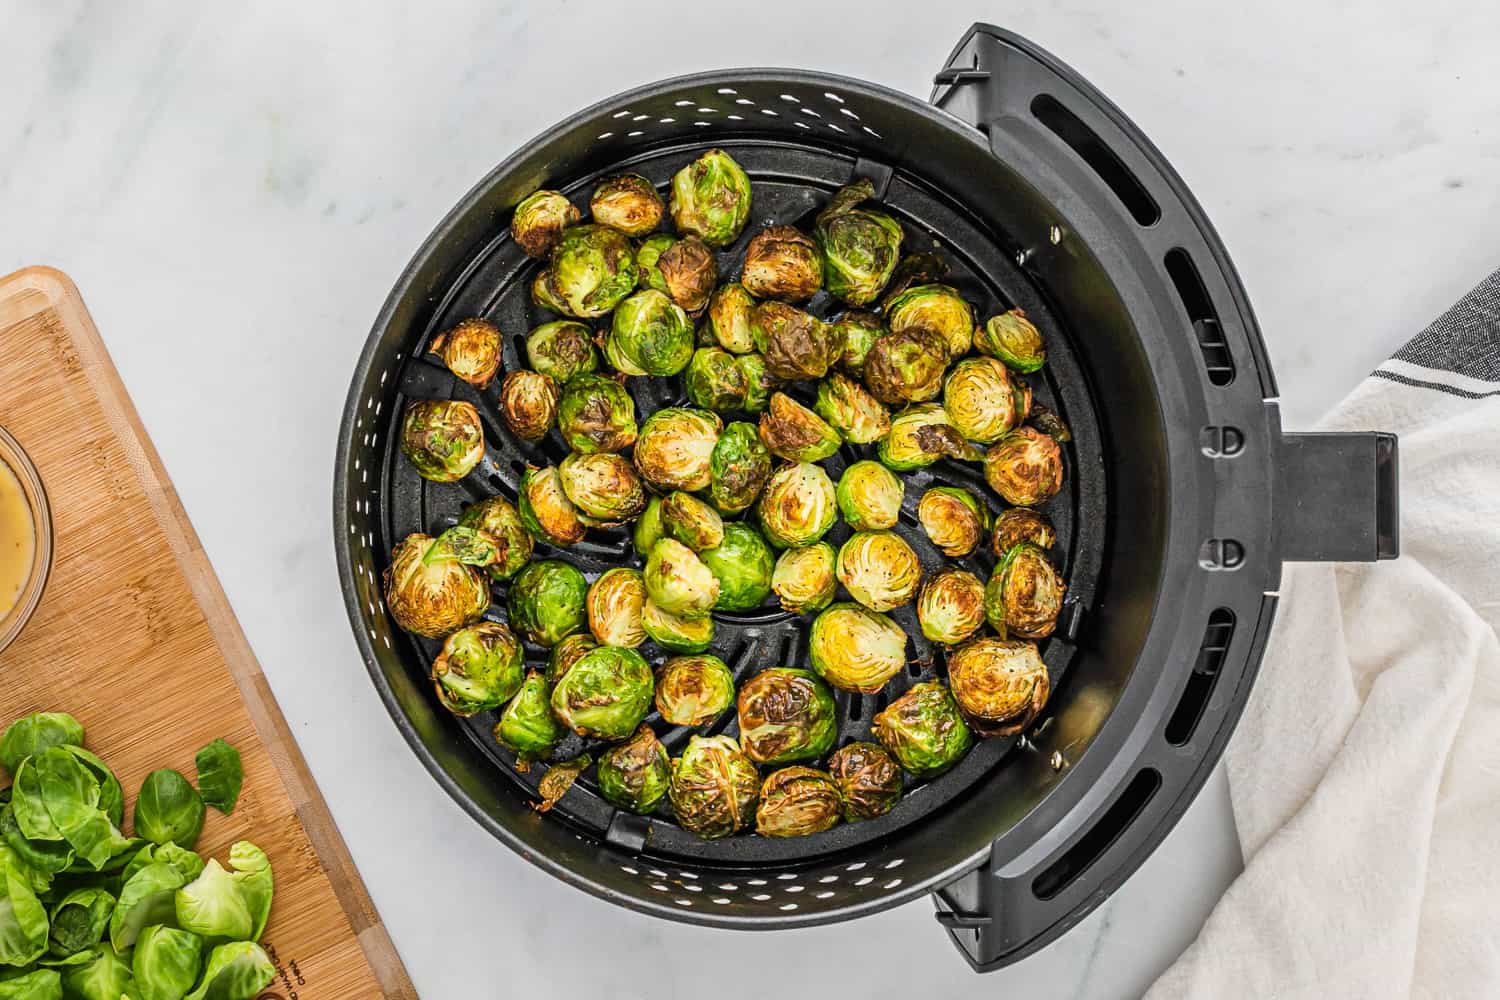 Cooked Brussels sprouts in an air fryer.